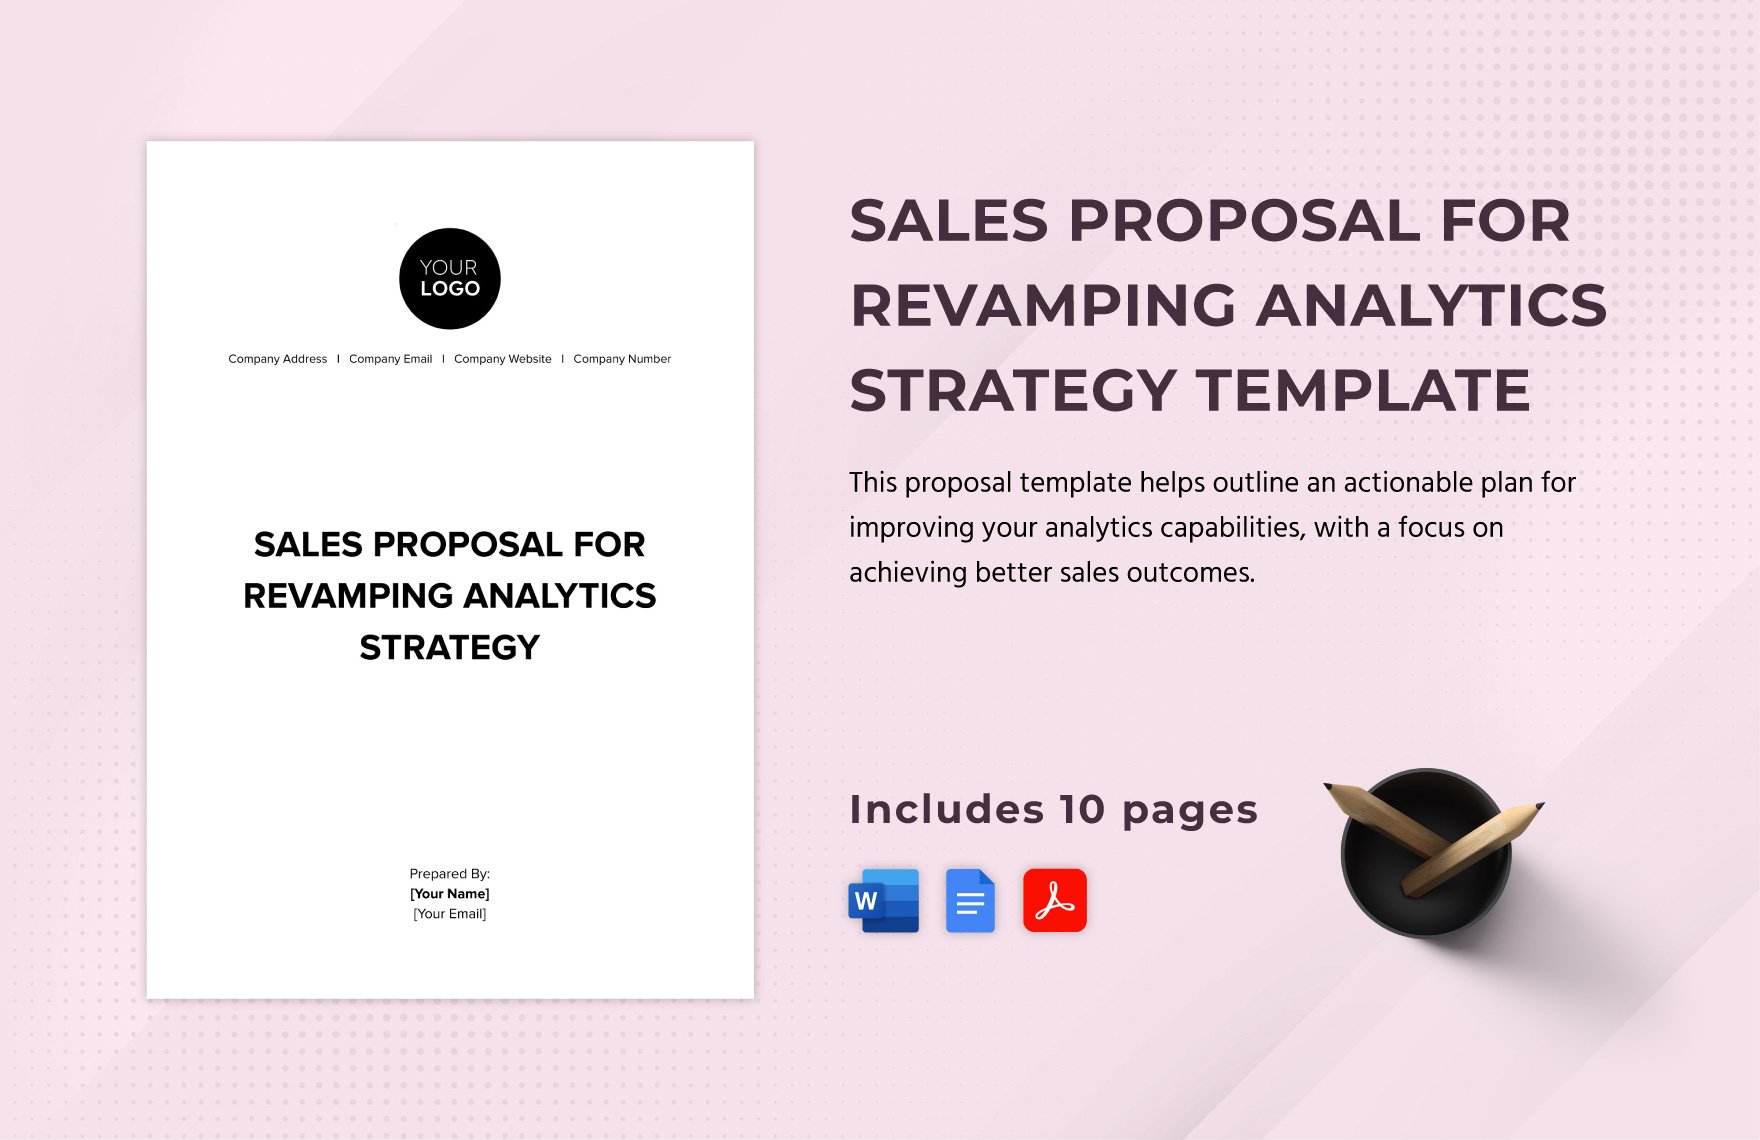 Sales Proposal for Revamping Analytics Strategy Template